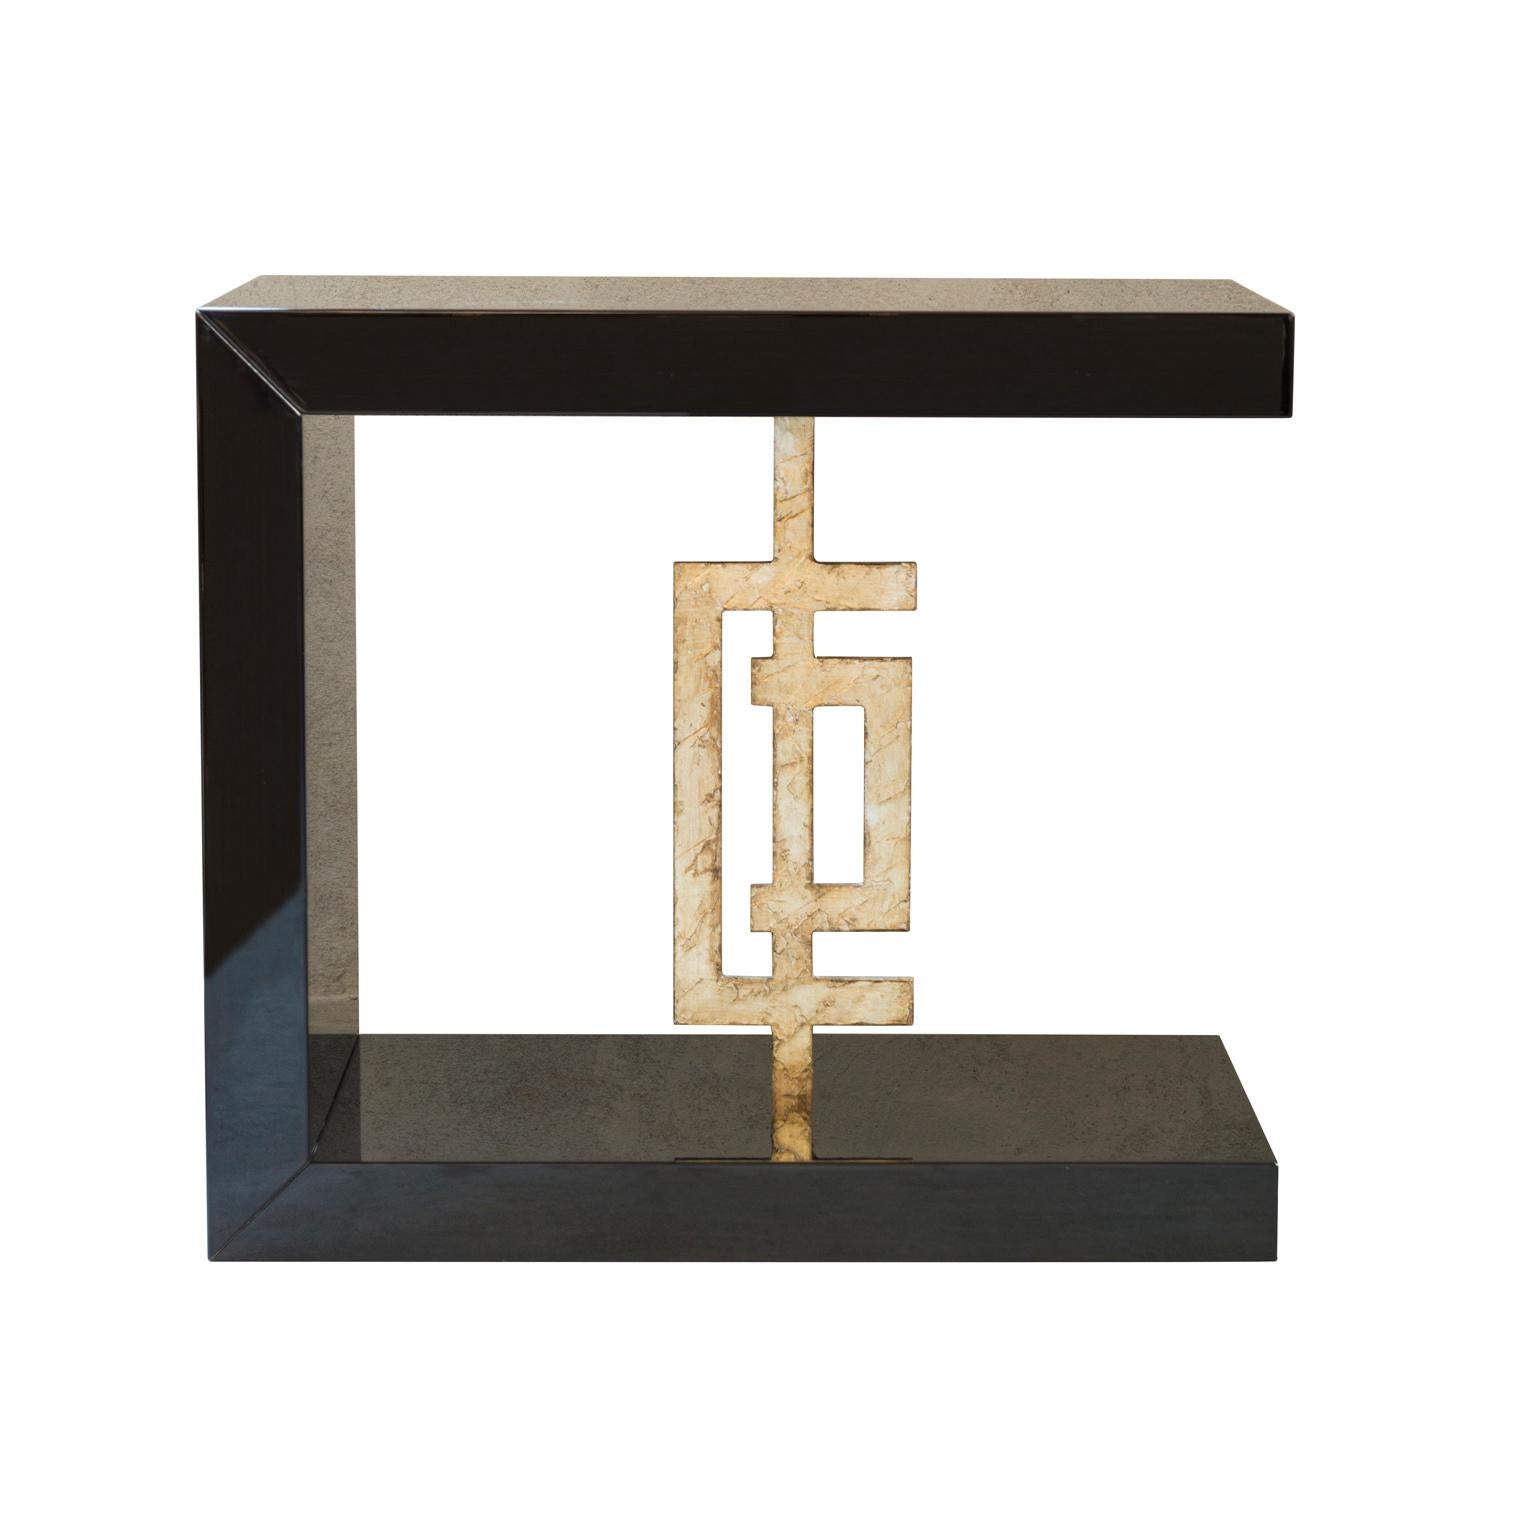 Designed by IC and crafted by skilled Italian artisans, the side table features an unconventional C-shape positioned in between the top and bottom elements.
Finish: glossy dark oak with crinkled gold leaf.
Accessories and details: hidden